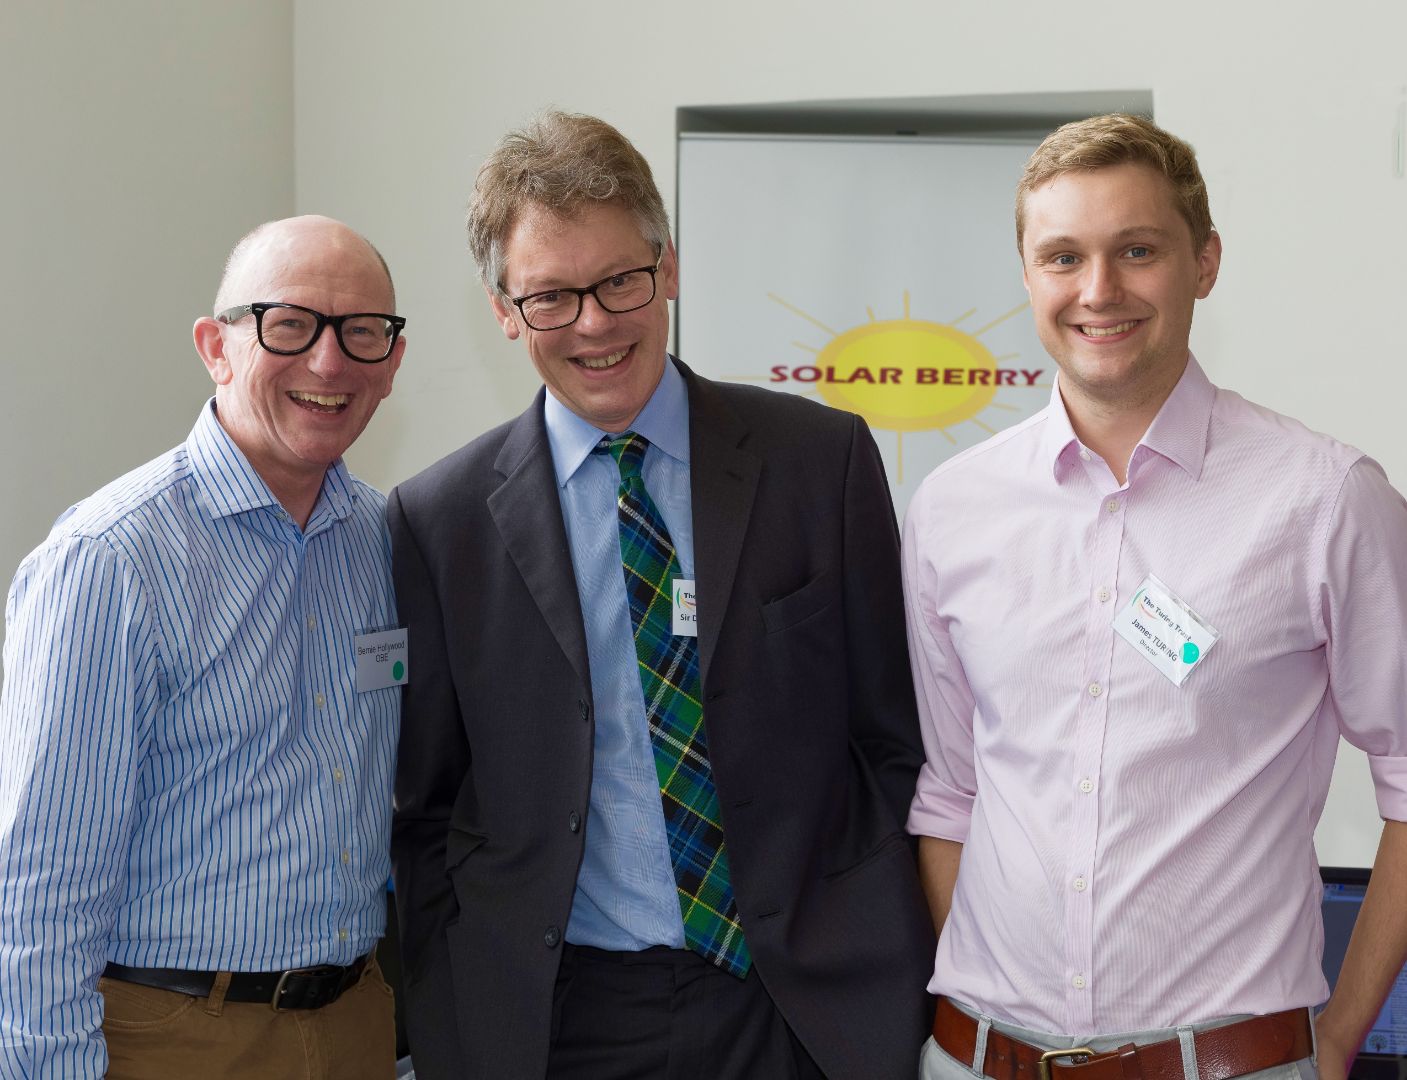 Bernie is proud to be a Trustee of the Turing Trust with Sir Dermot Turing and James Turing. ye